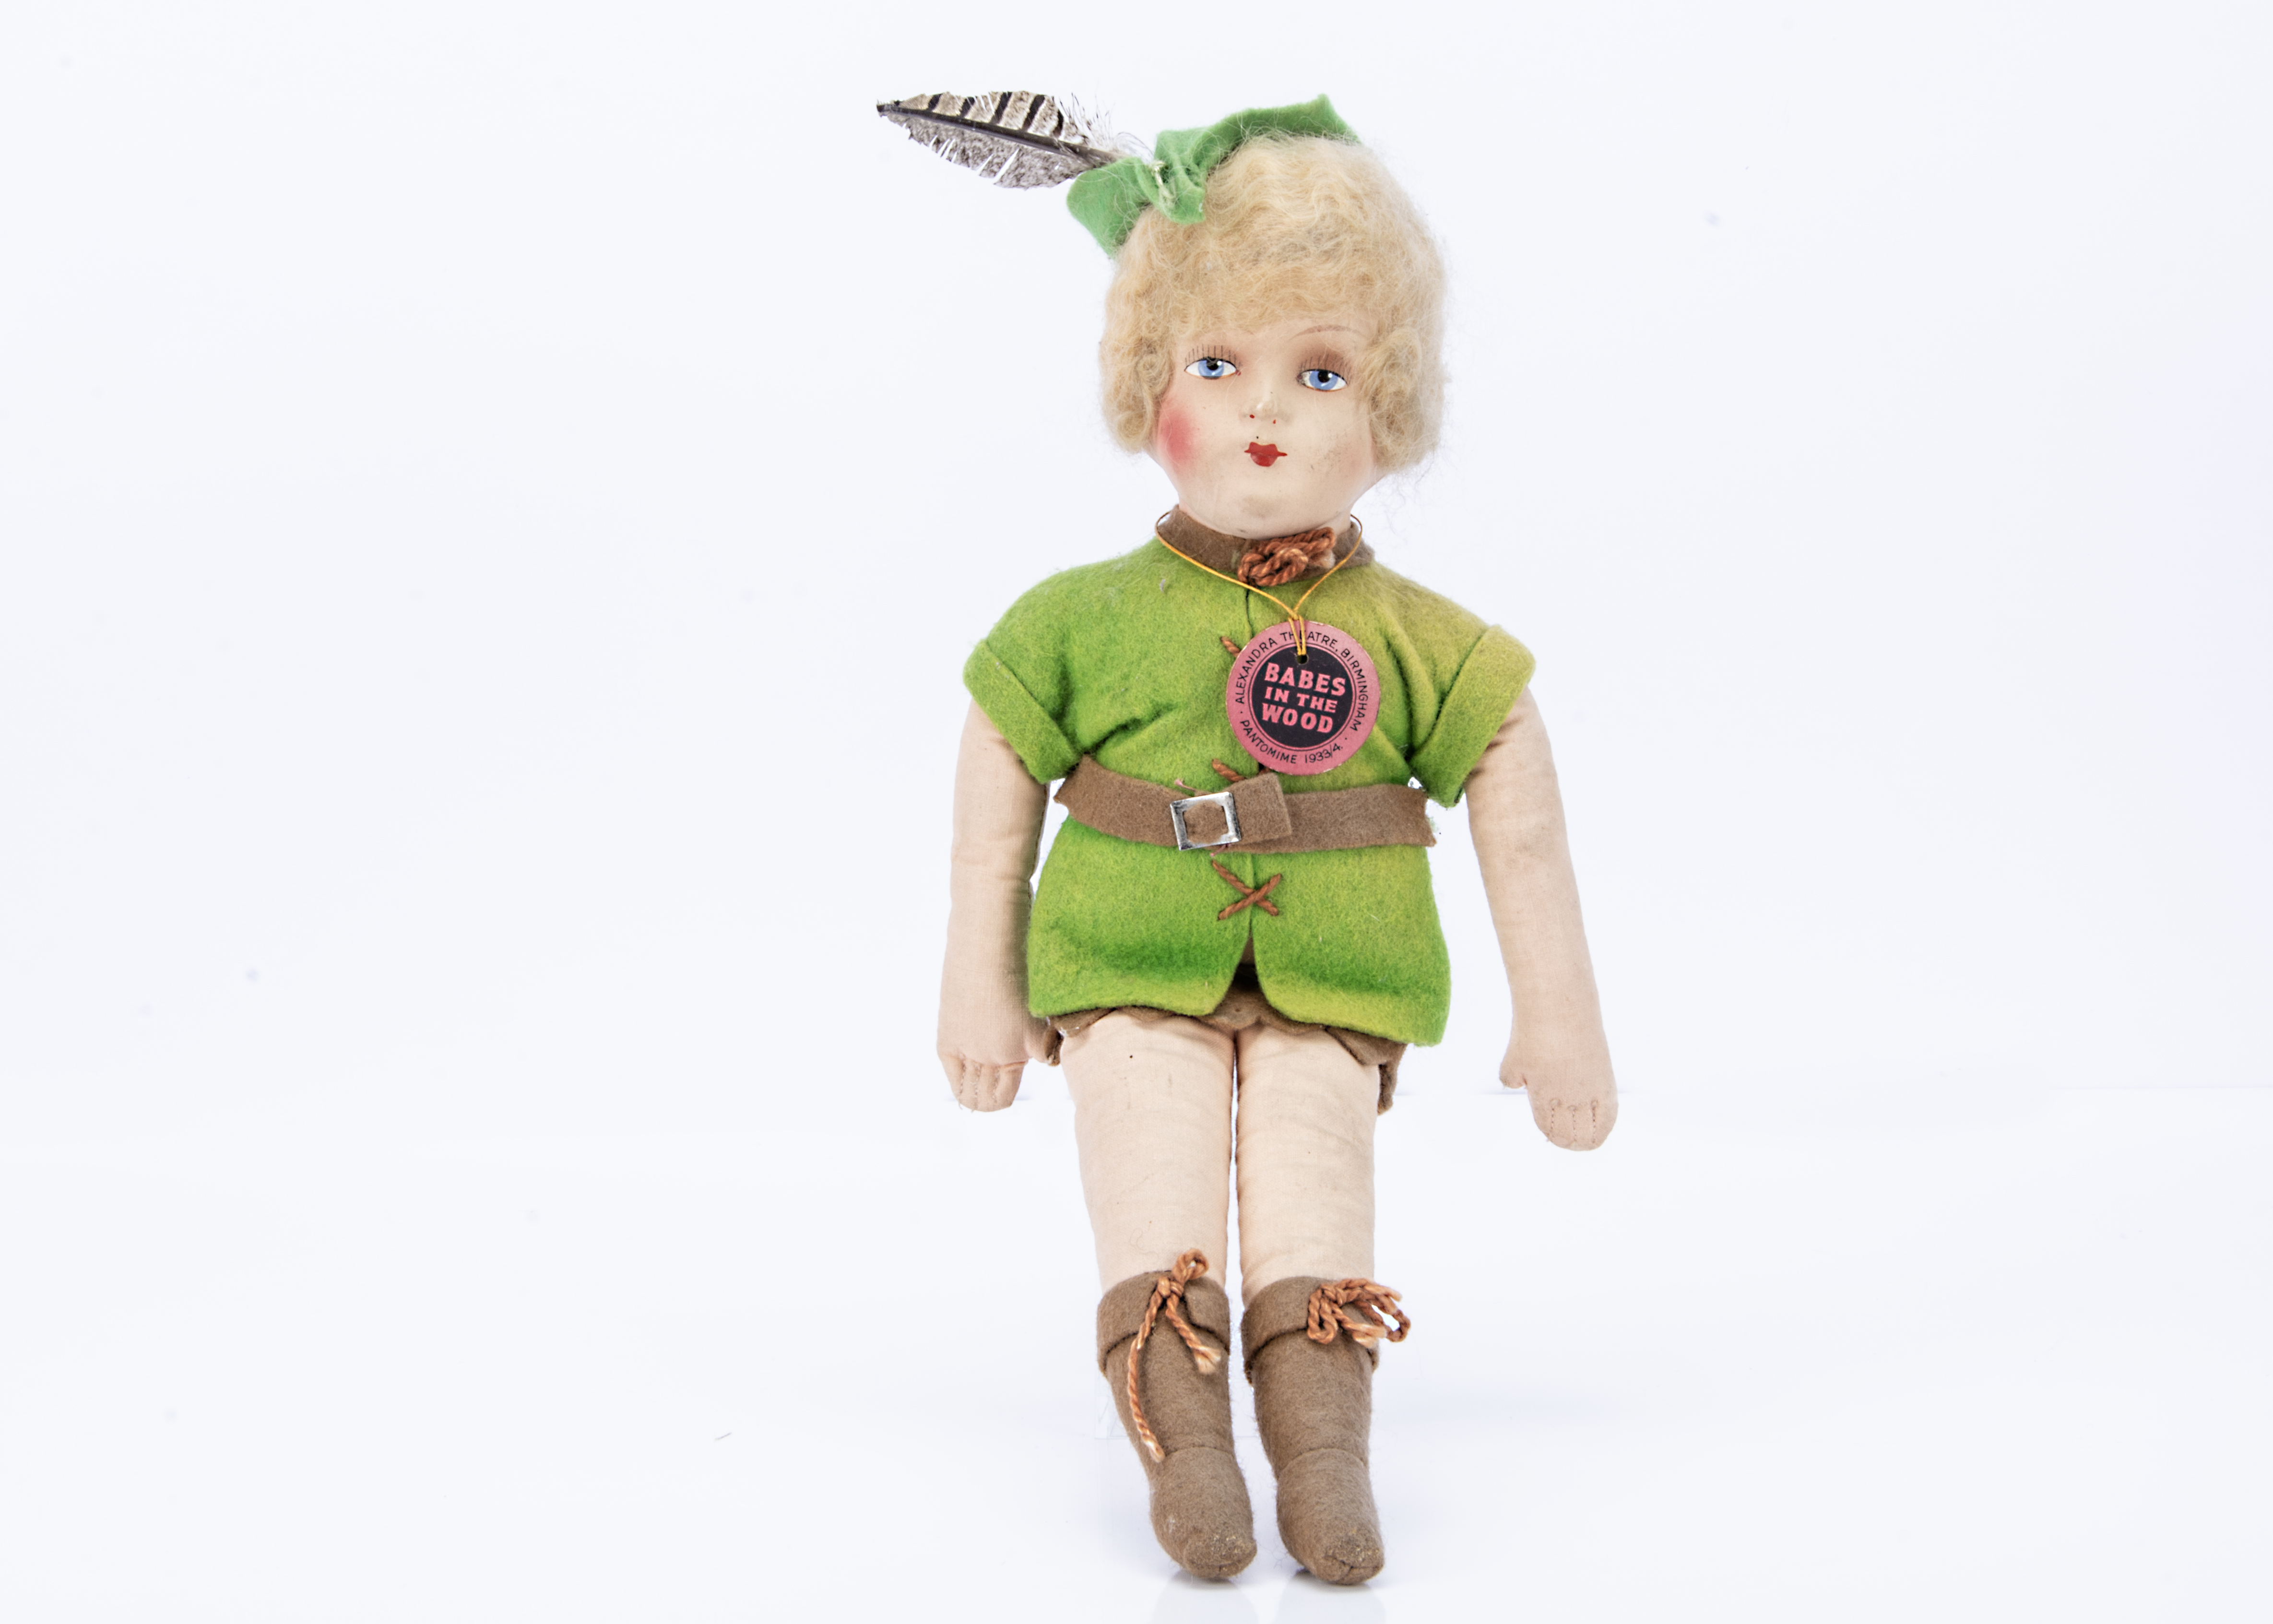 A Robin Hood from Babes in the Woods with card tag, from a collection of pantomime toys and dolls